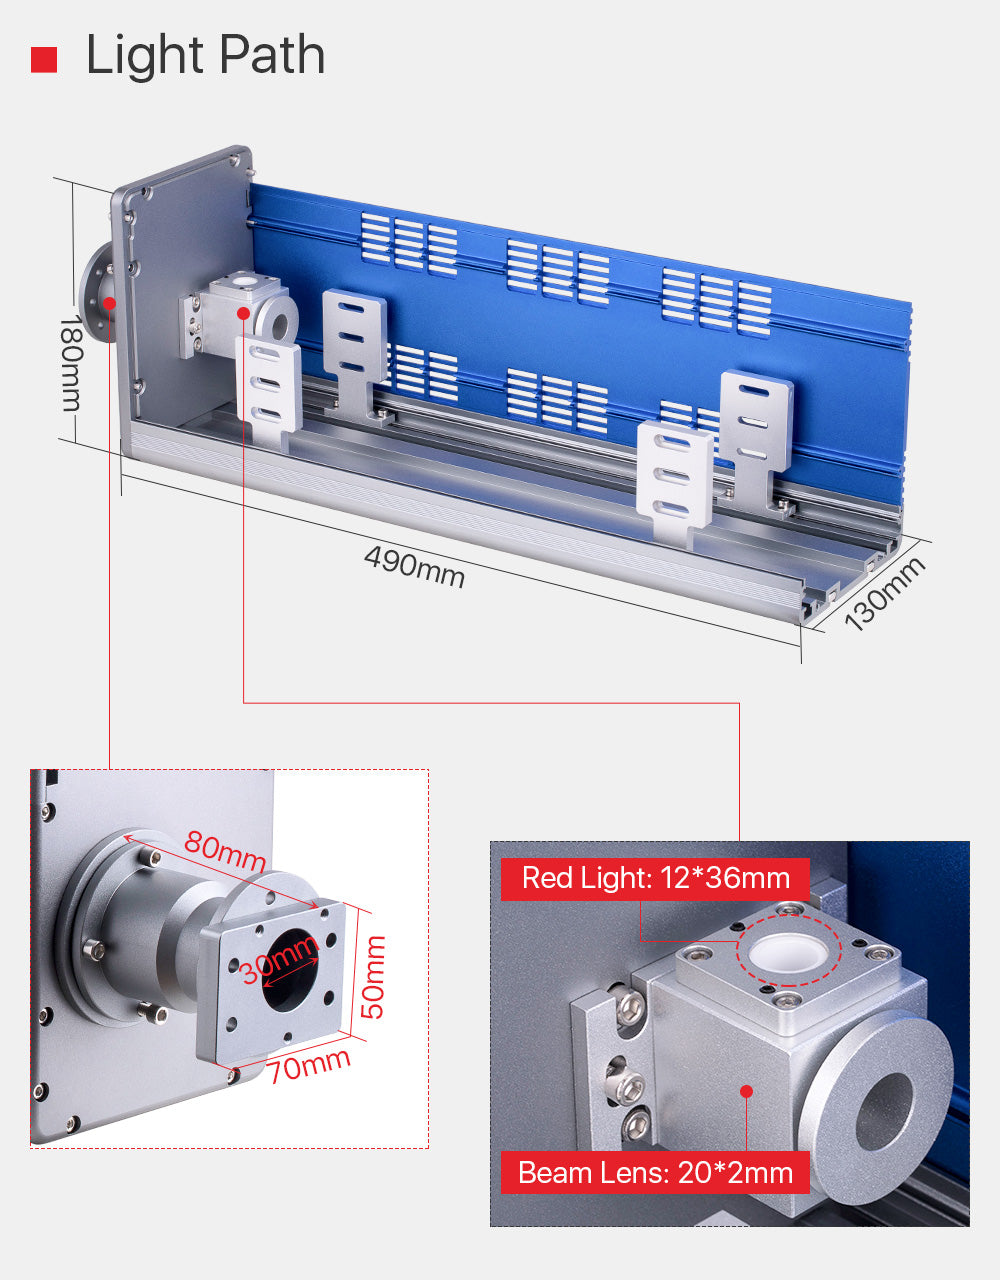 DaWei Light Path, can suitable for many kinds RF-Laser Source.